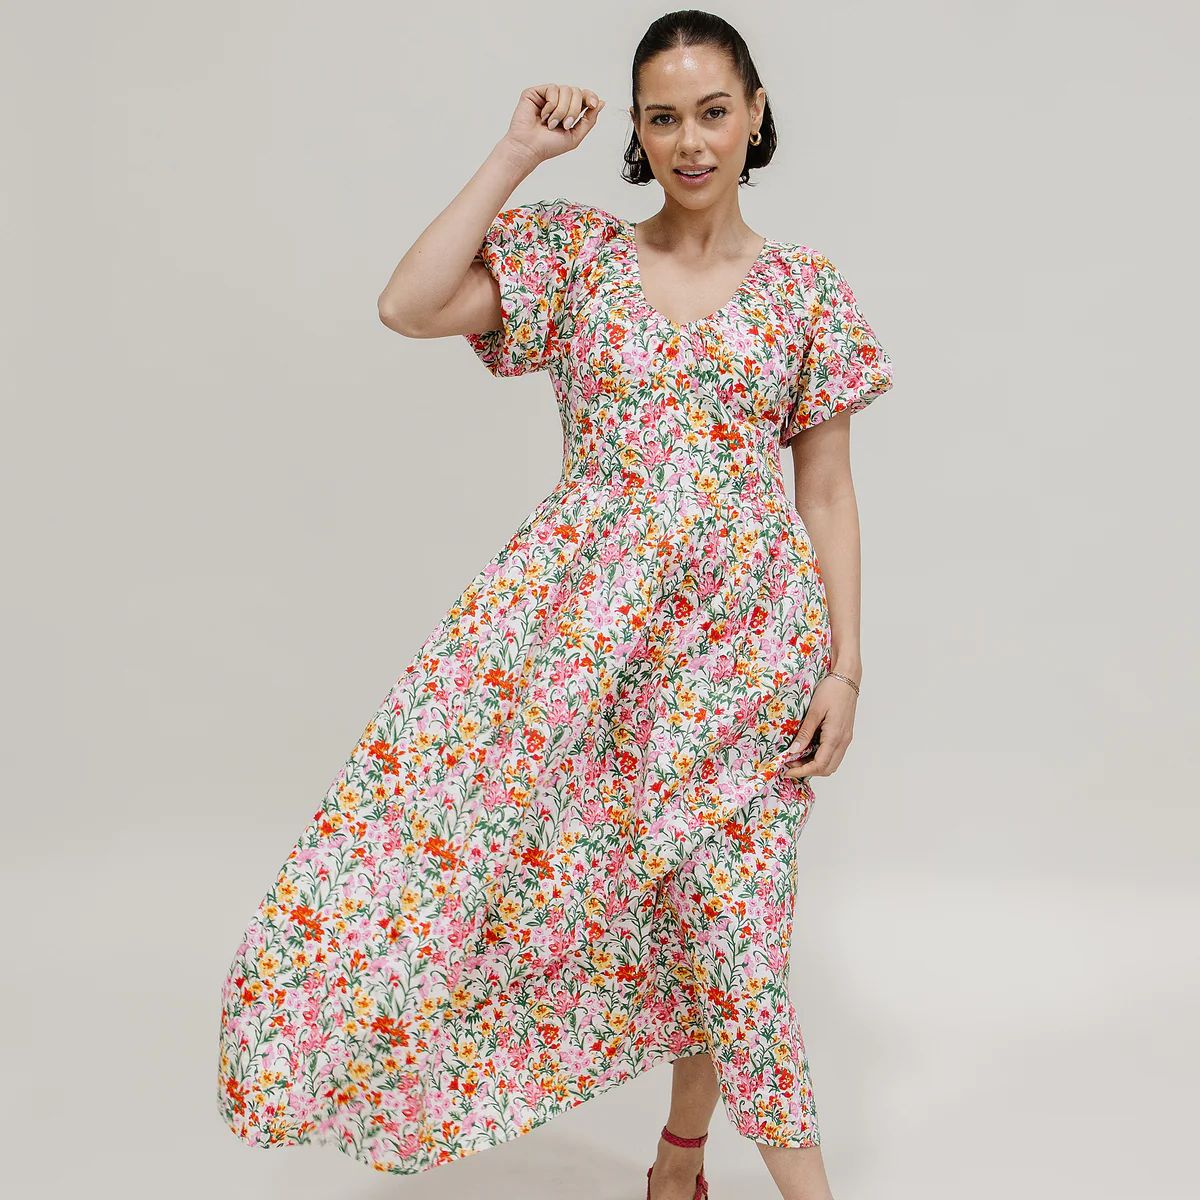 Stockplace The Label- The Garden Dress | Stockplace